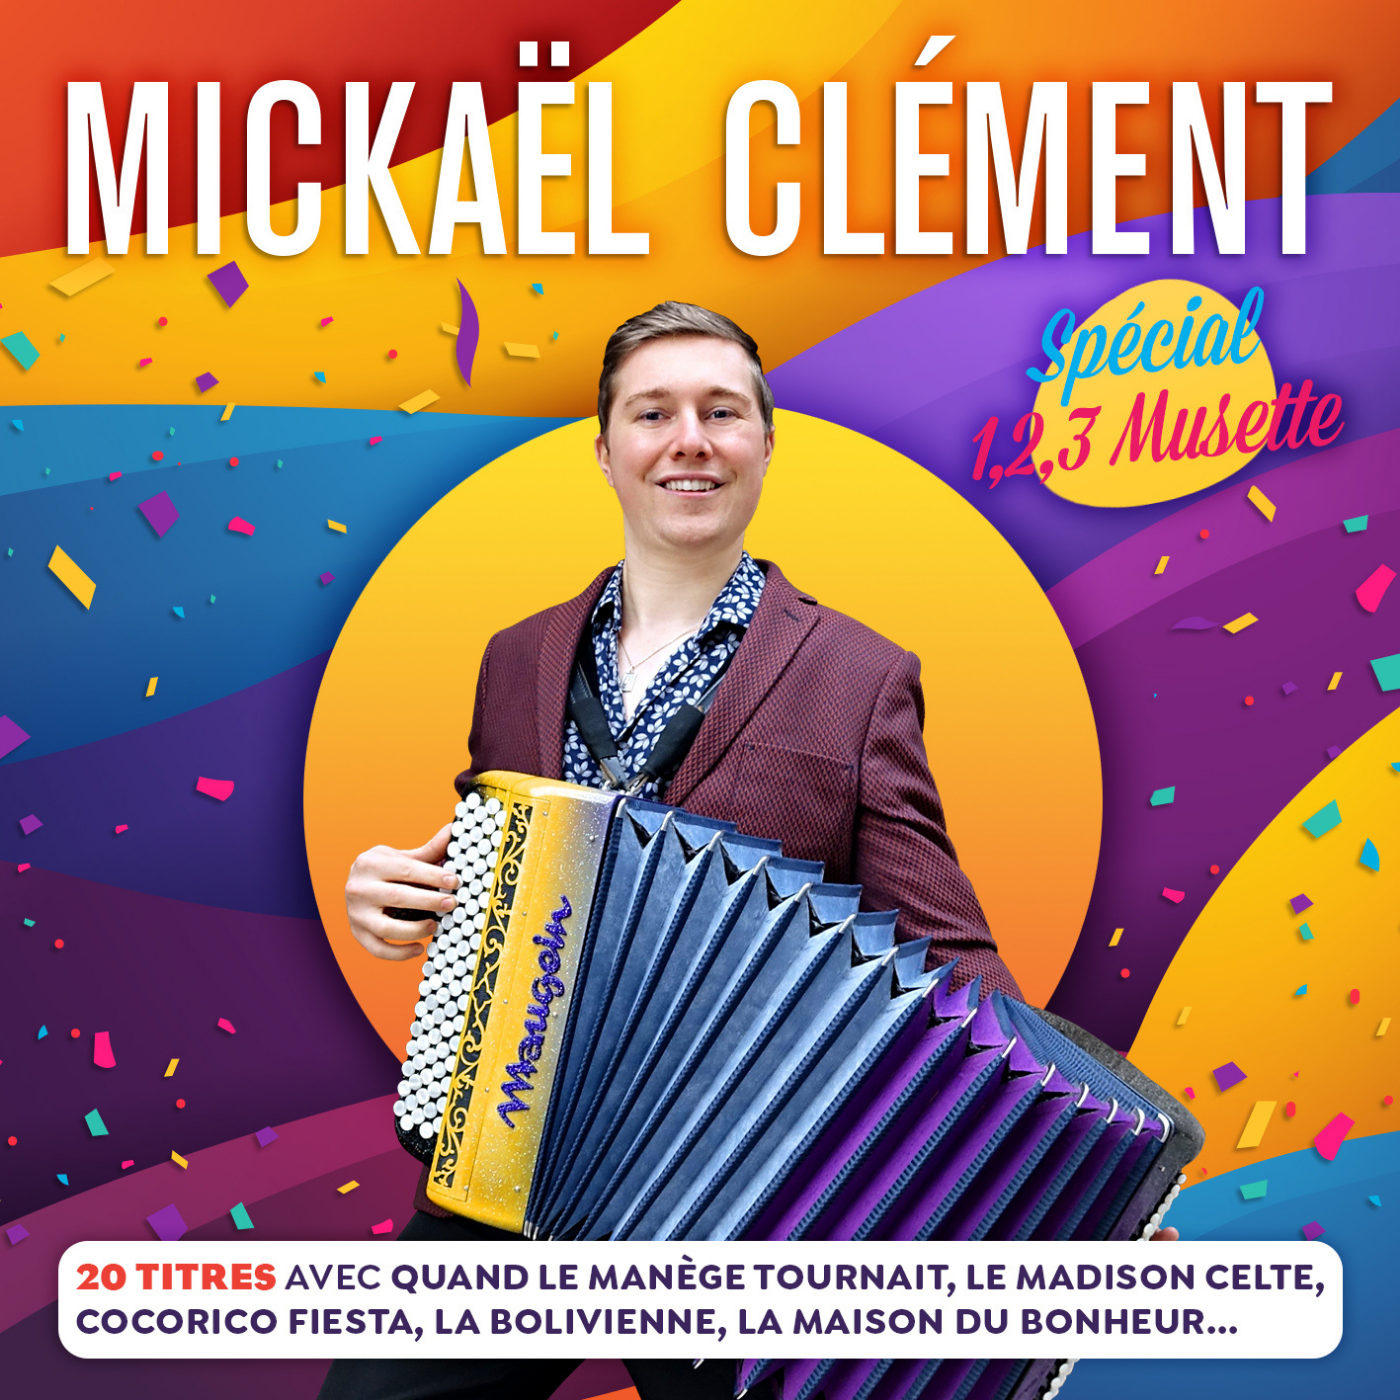 Cd mickael clement special 123 musette